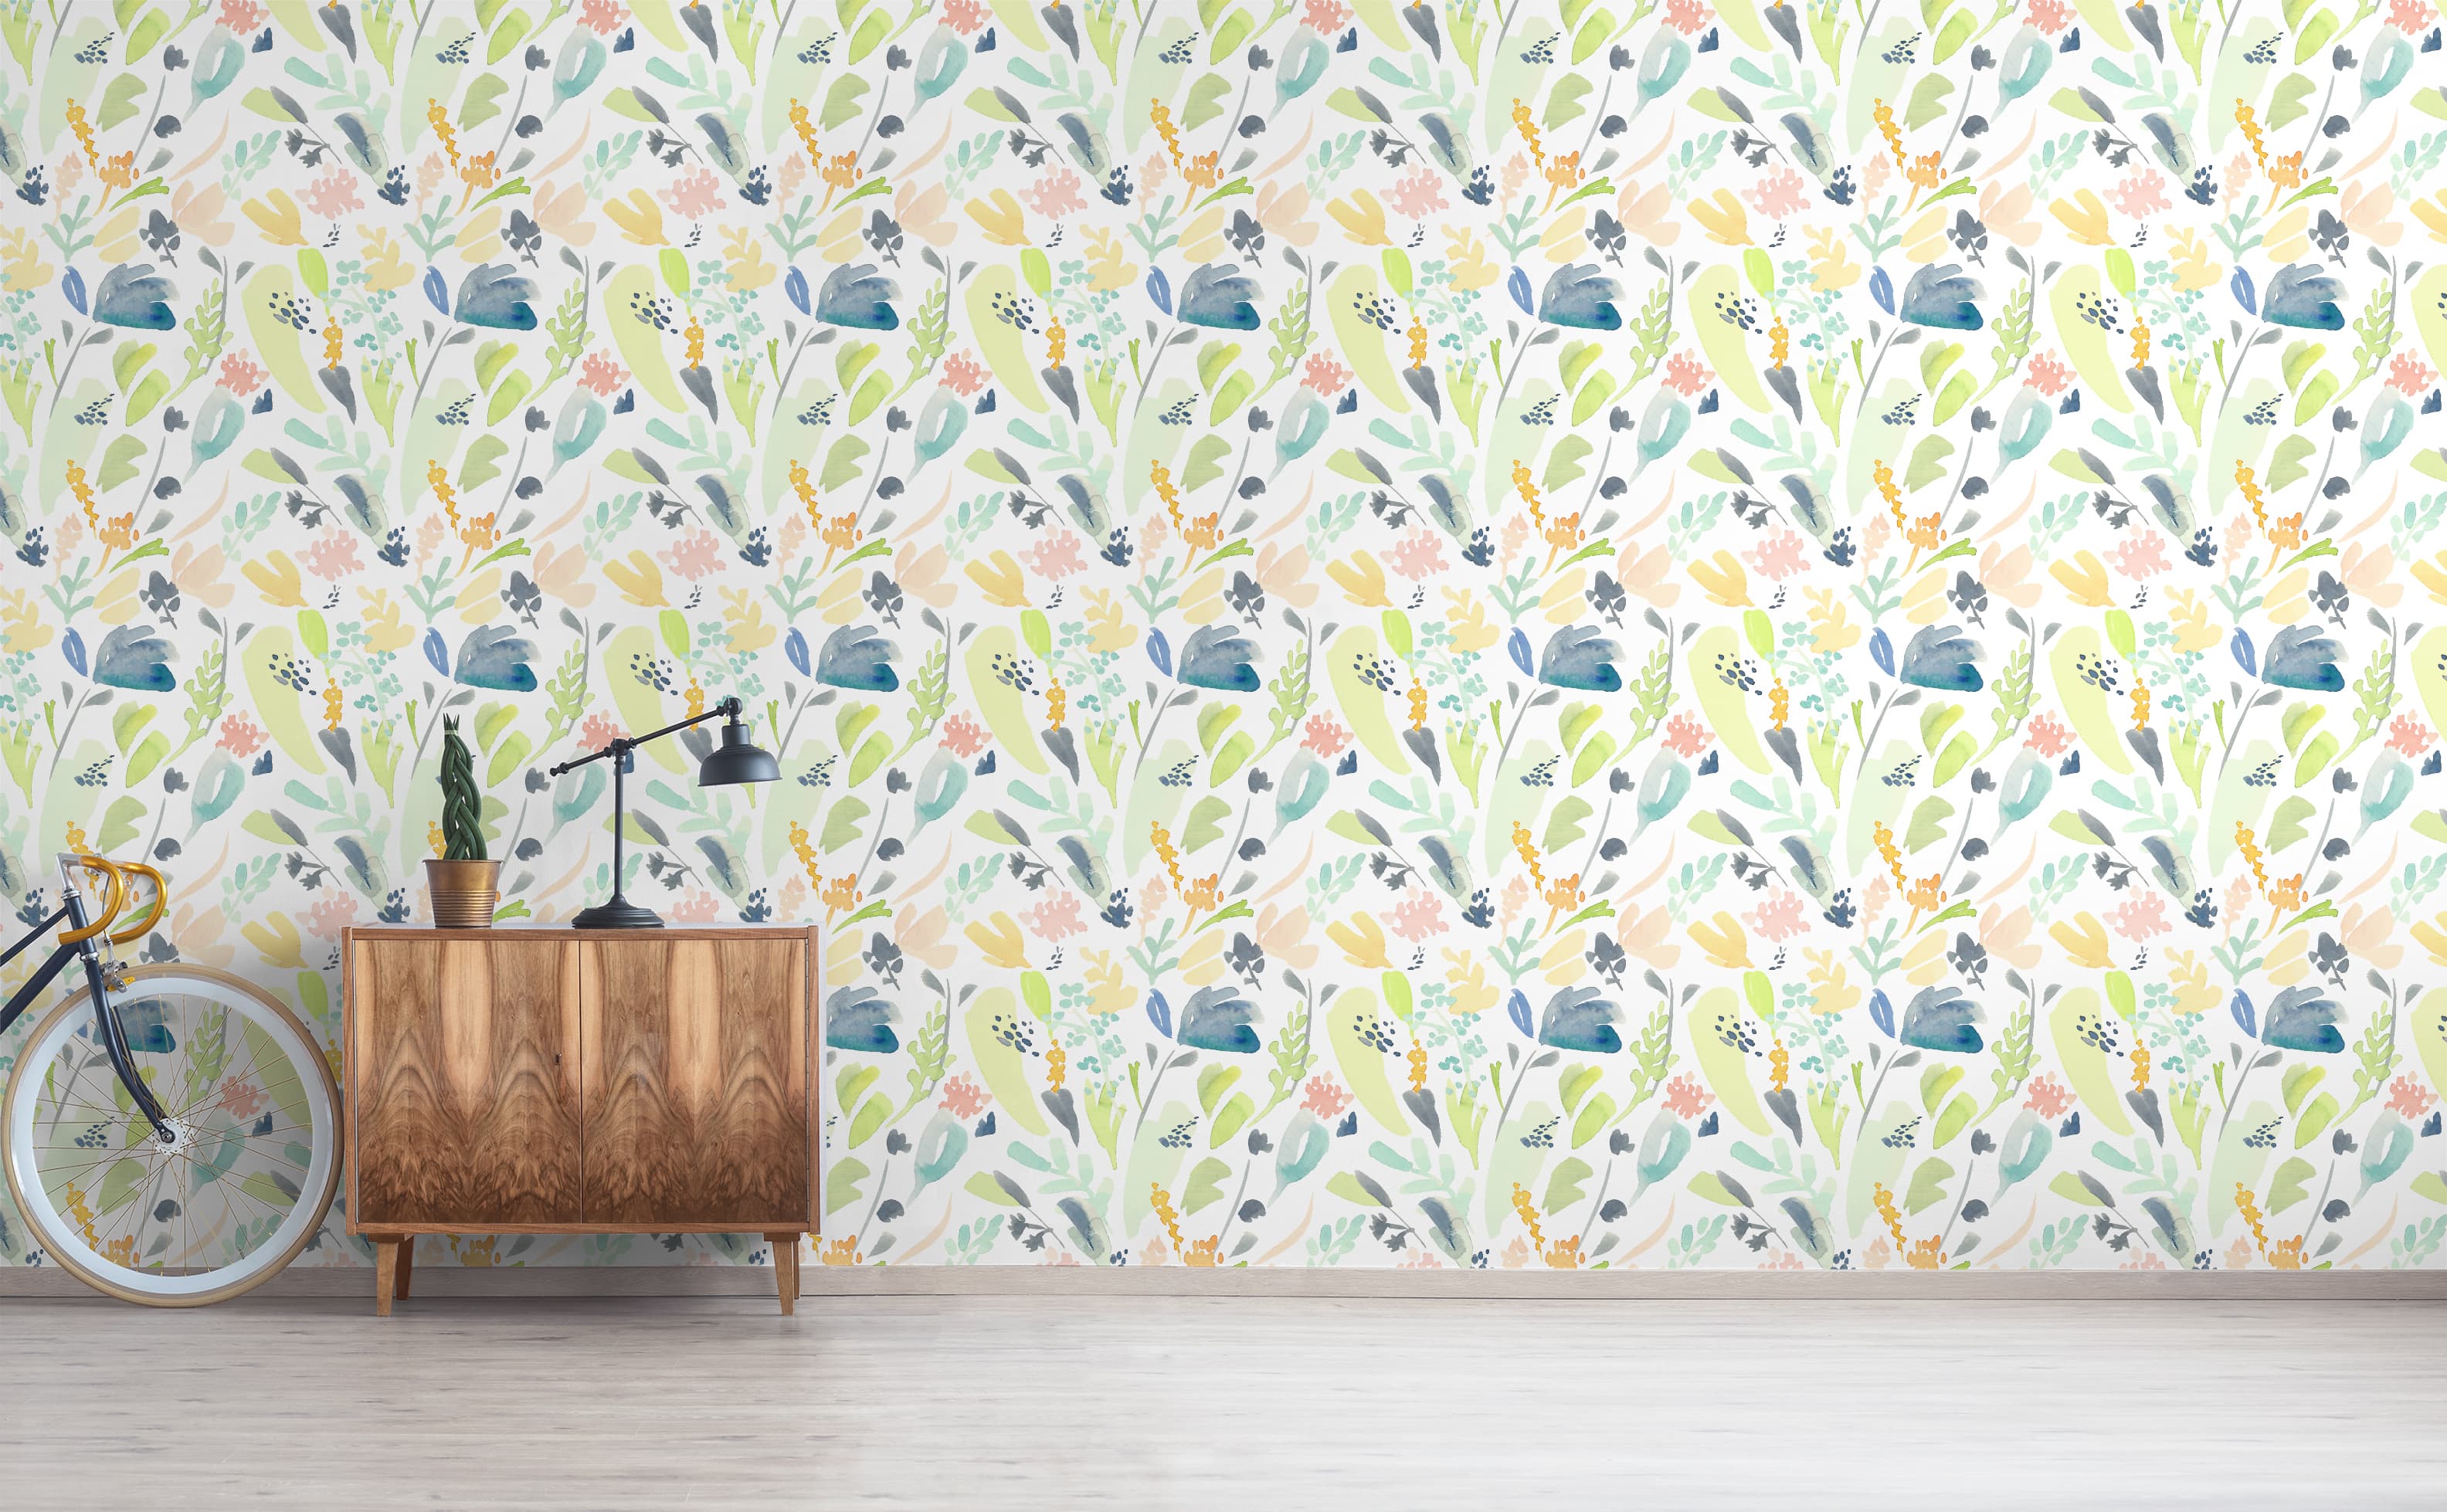 5 Ways To Cut The Cost Of Wallpaper - House Of Hipsters